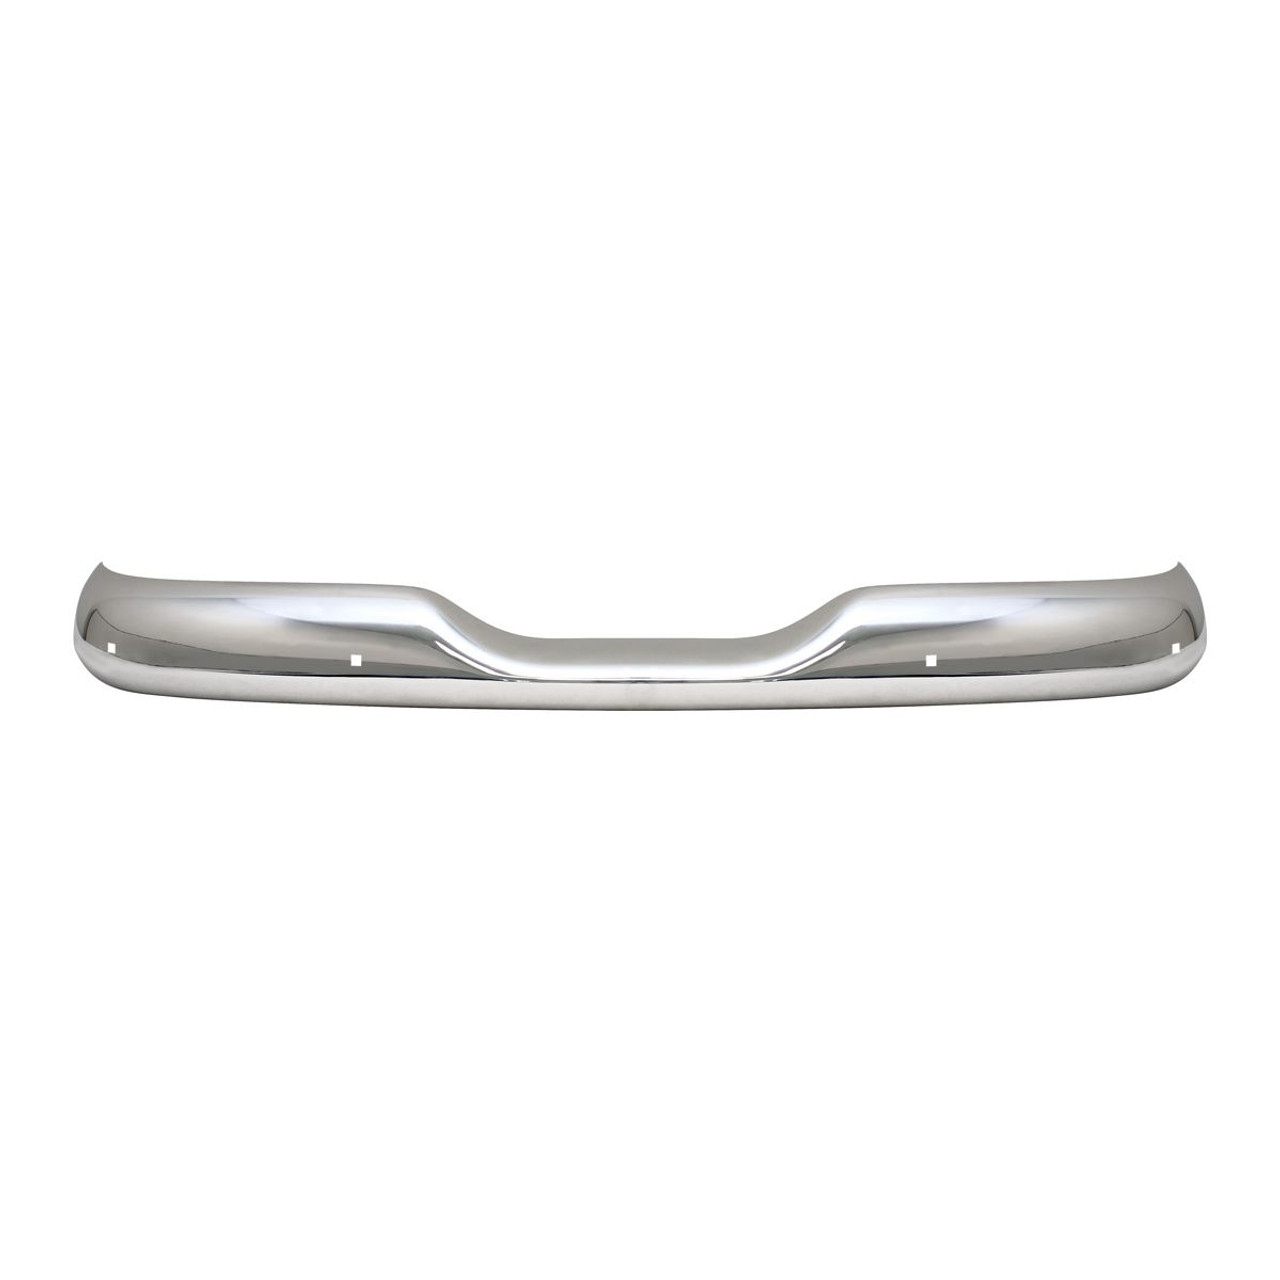 United Pacific  Chrome Rear Bumper For 1955-59 Chevy & GMC Stepside Truck